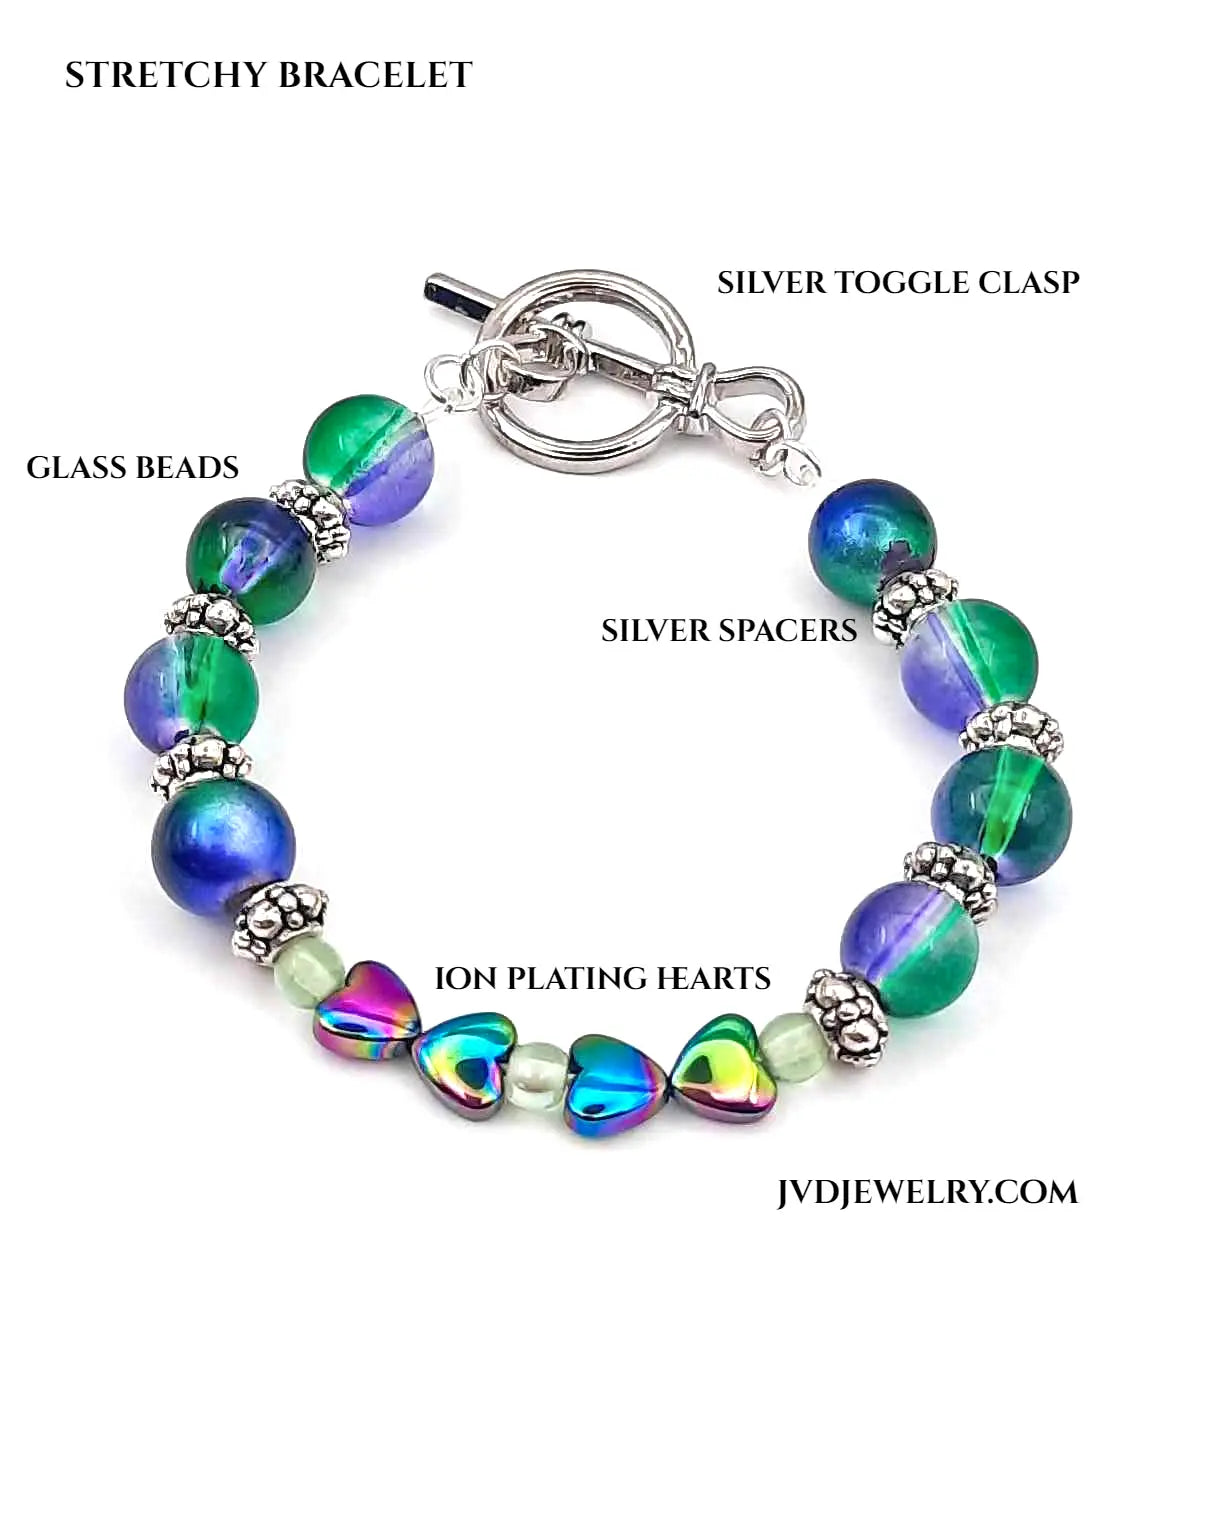 Peacock glass bead ion plating hearts bracelet - Image #3